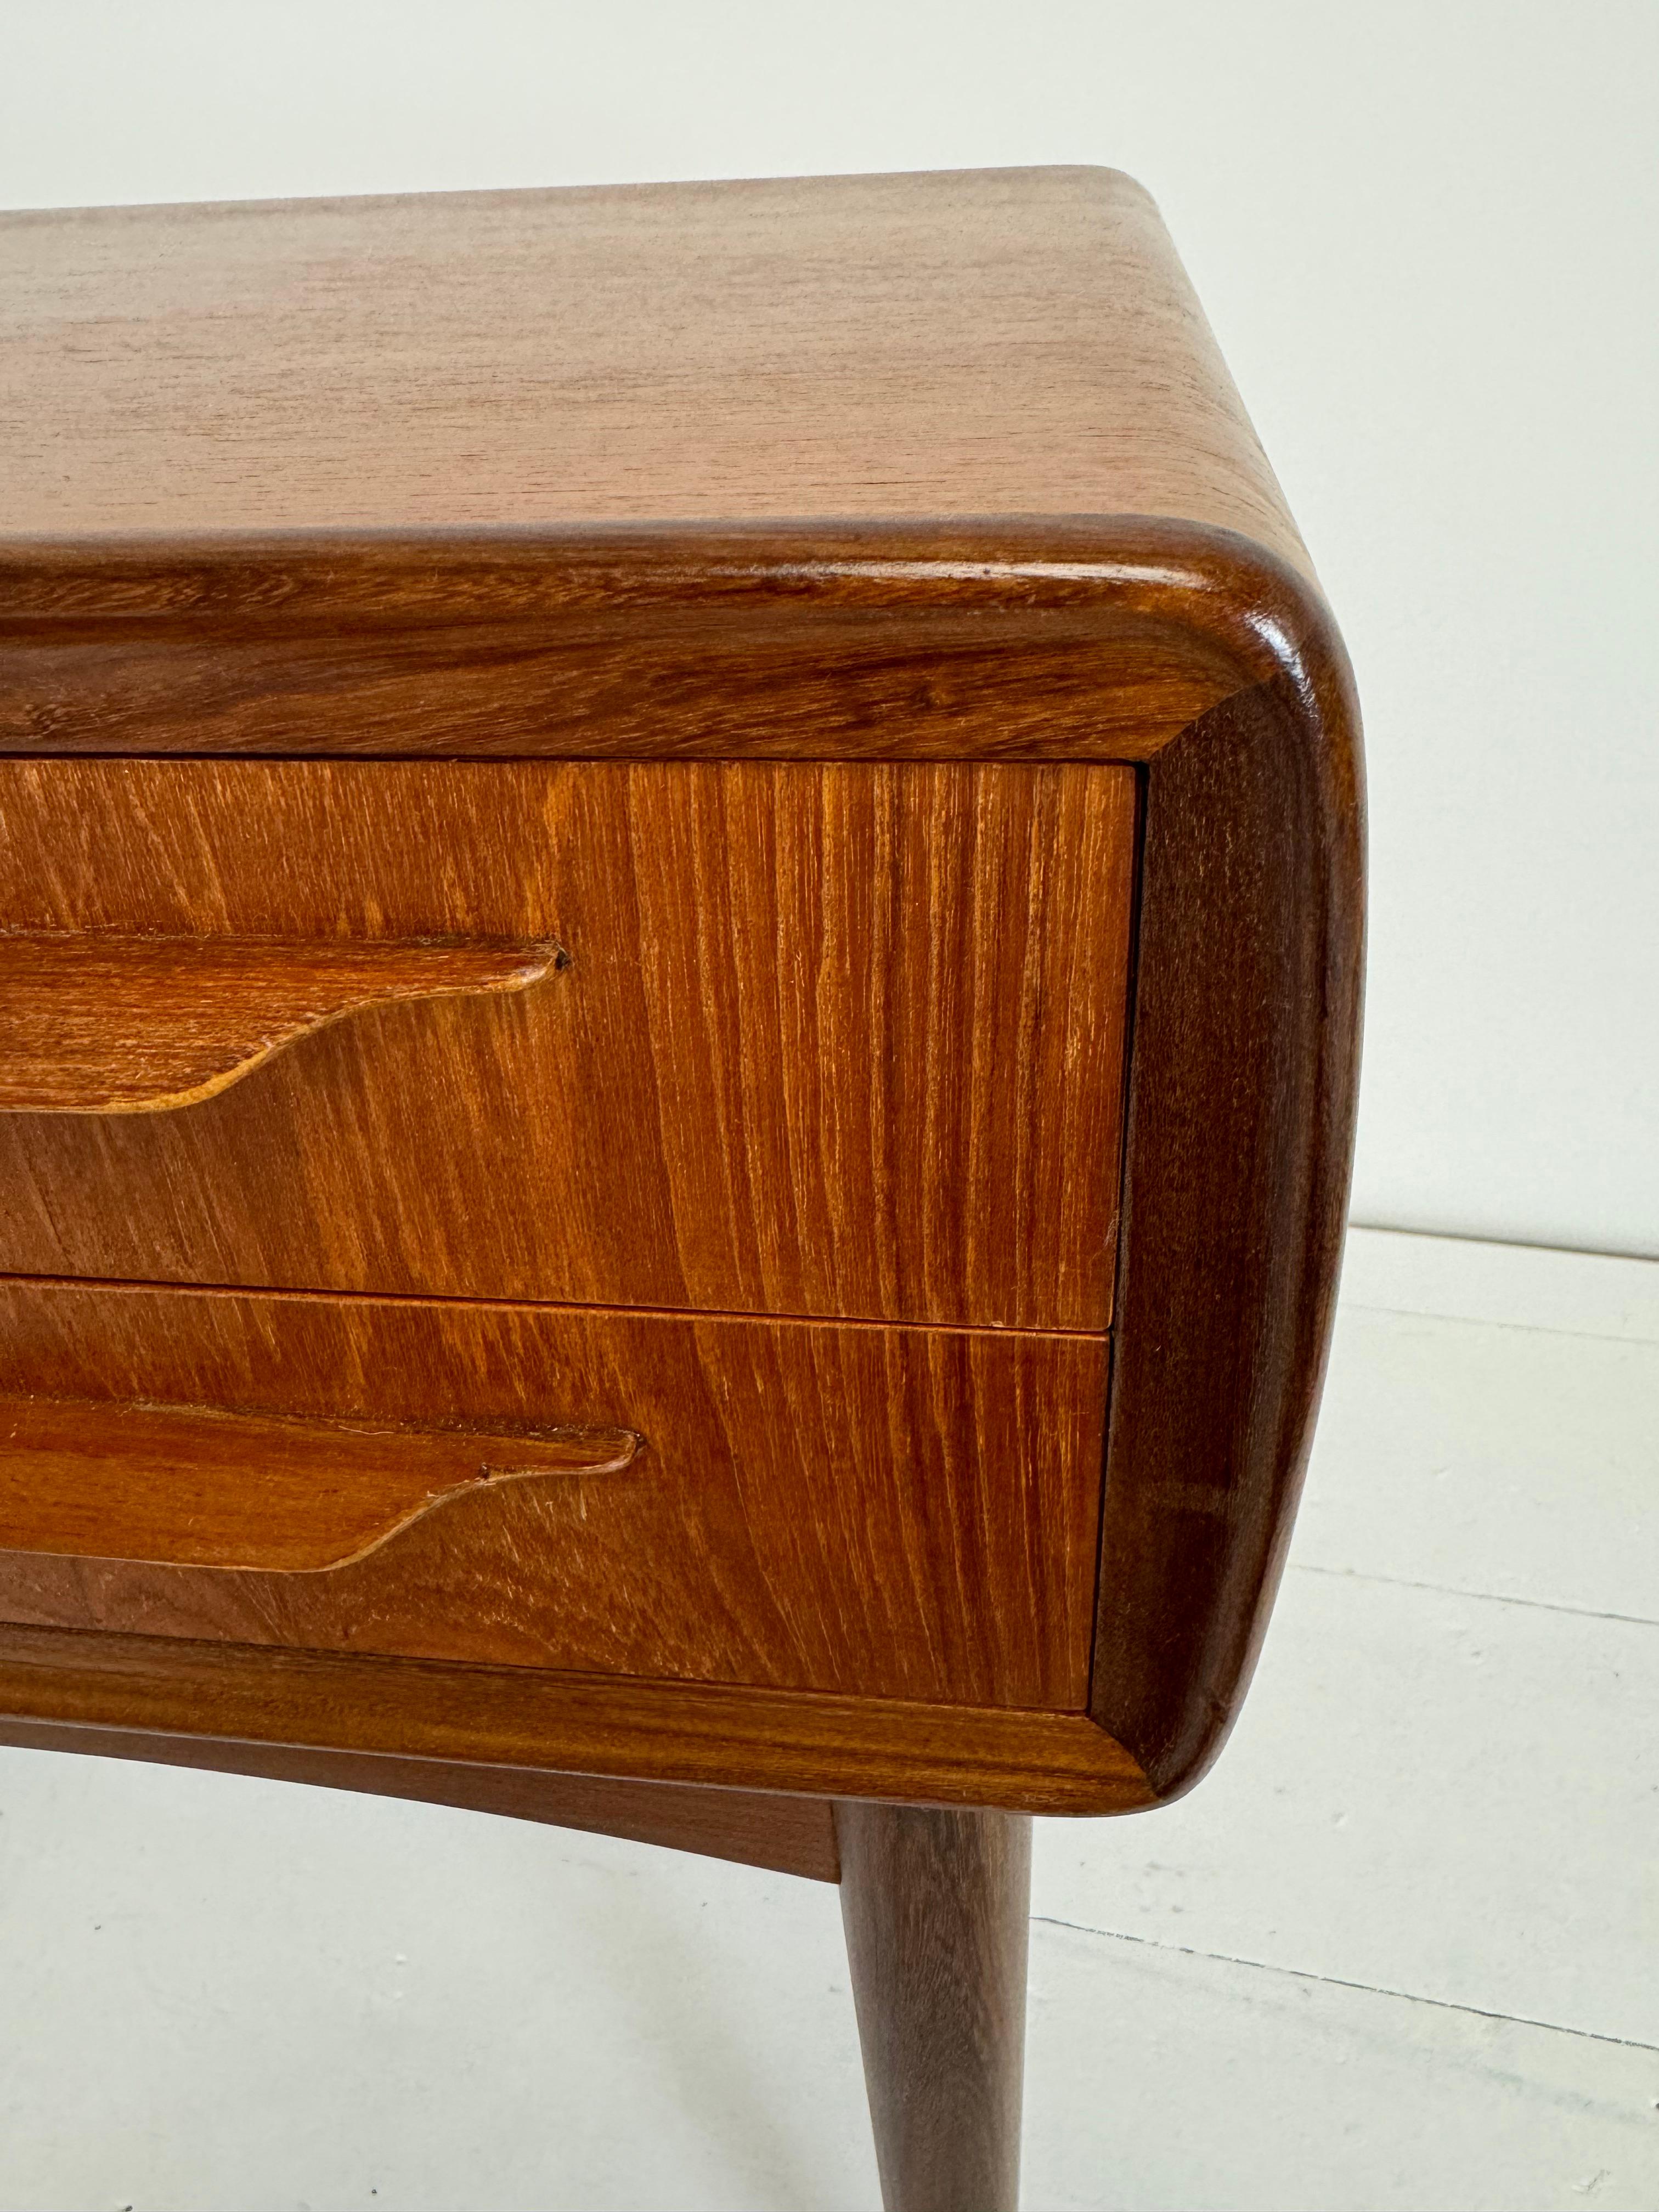 A Pair of Teak Night Stands by Johaness Andersen c.1960's For Sale 4